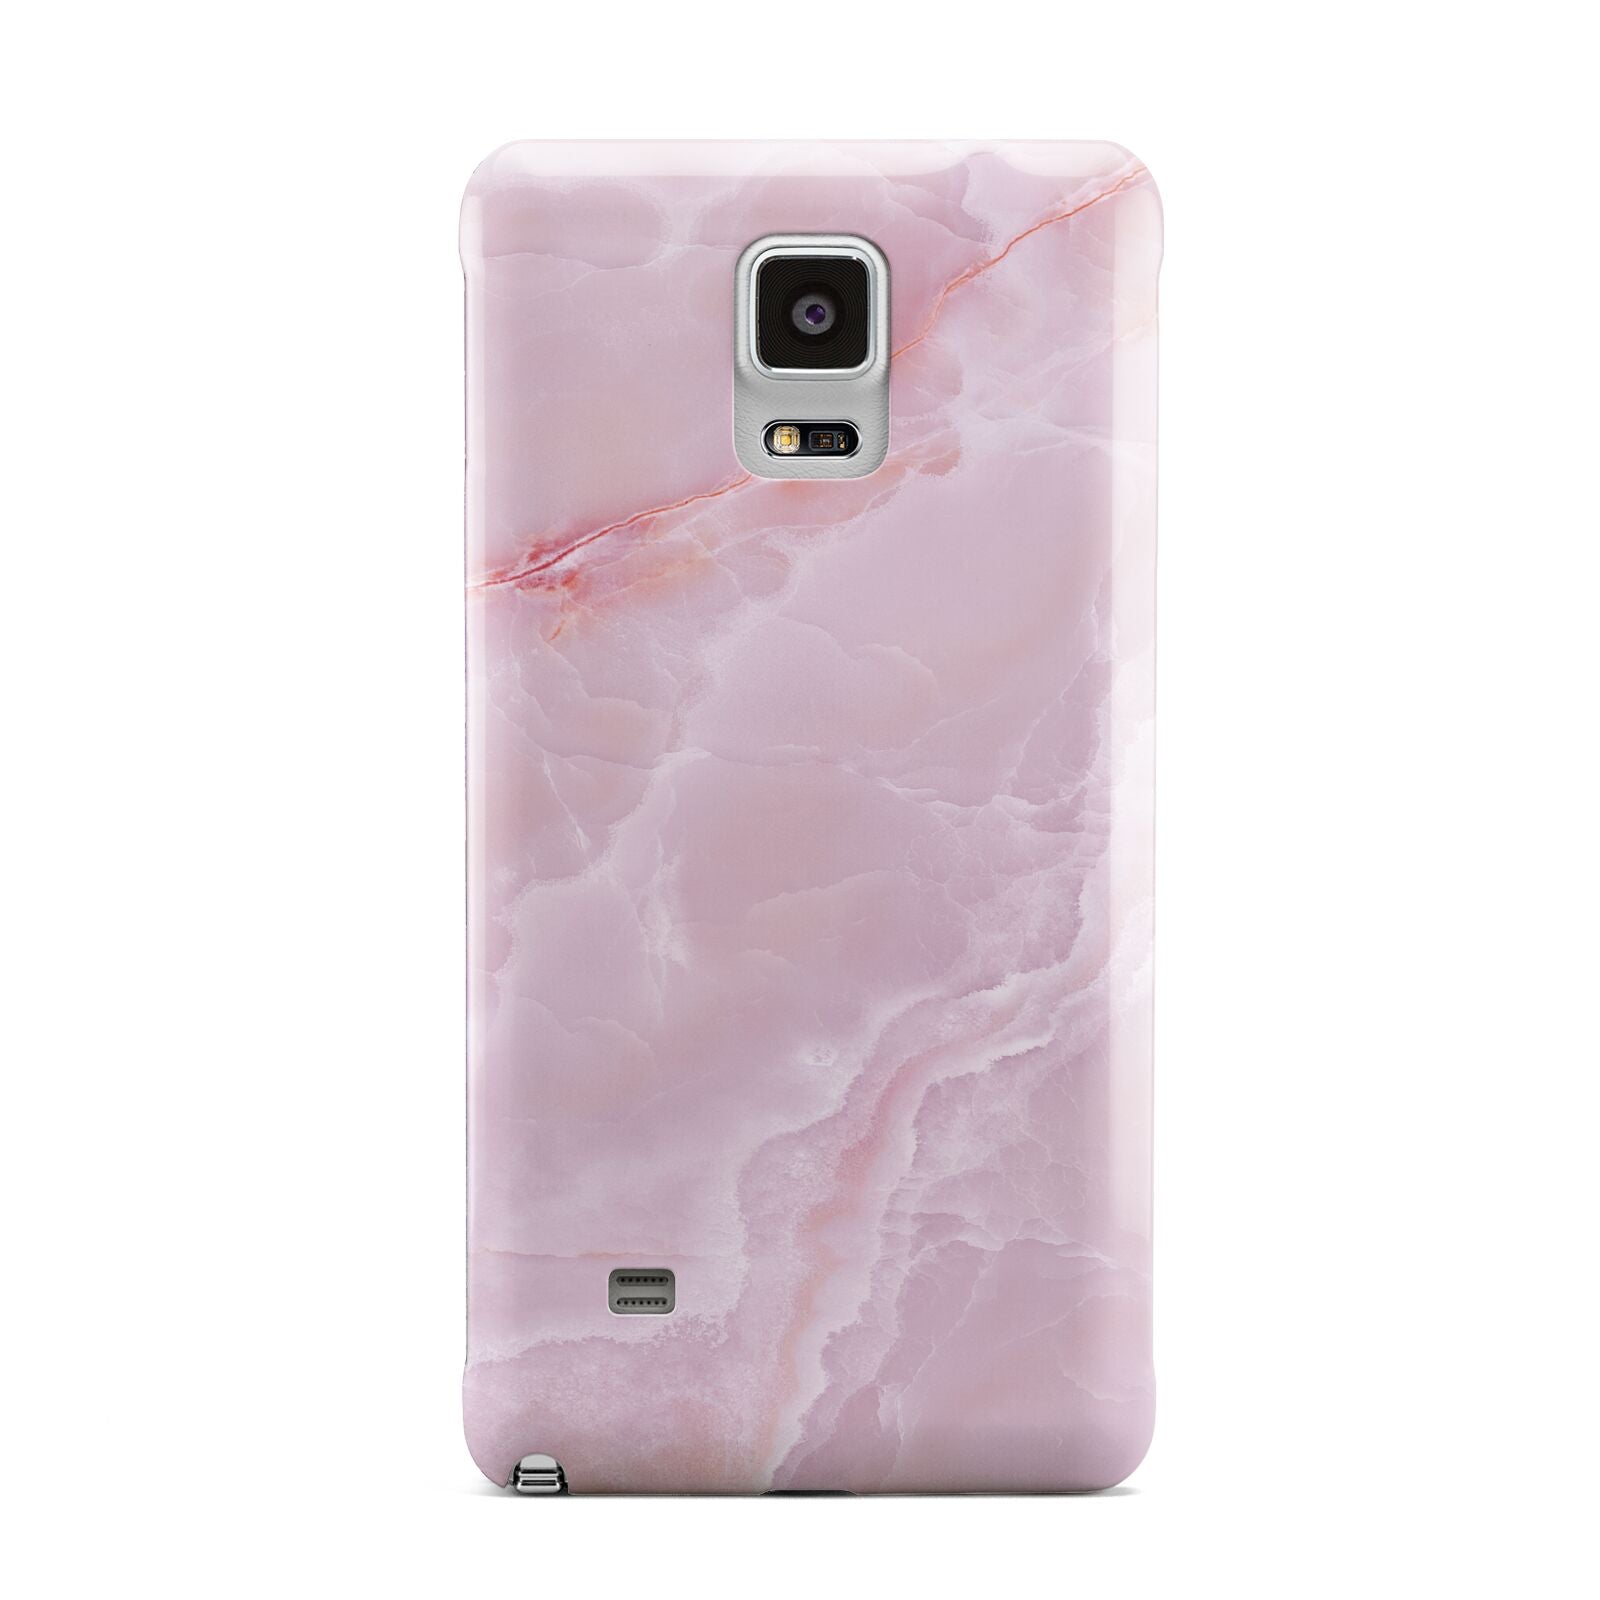 Dreamy Pink Marble Samsung Galaxy Note 4 Case